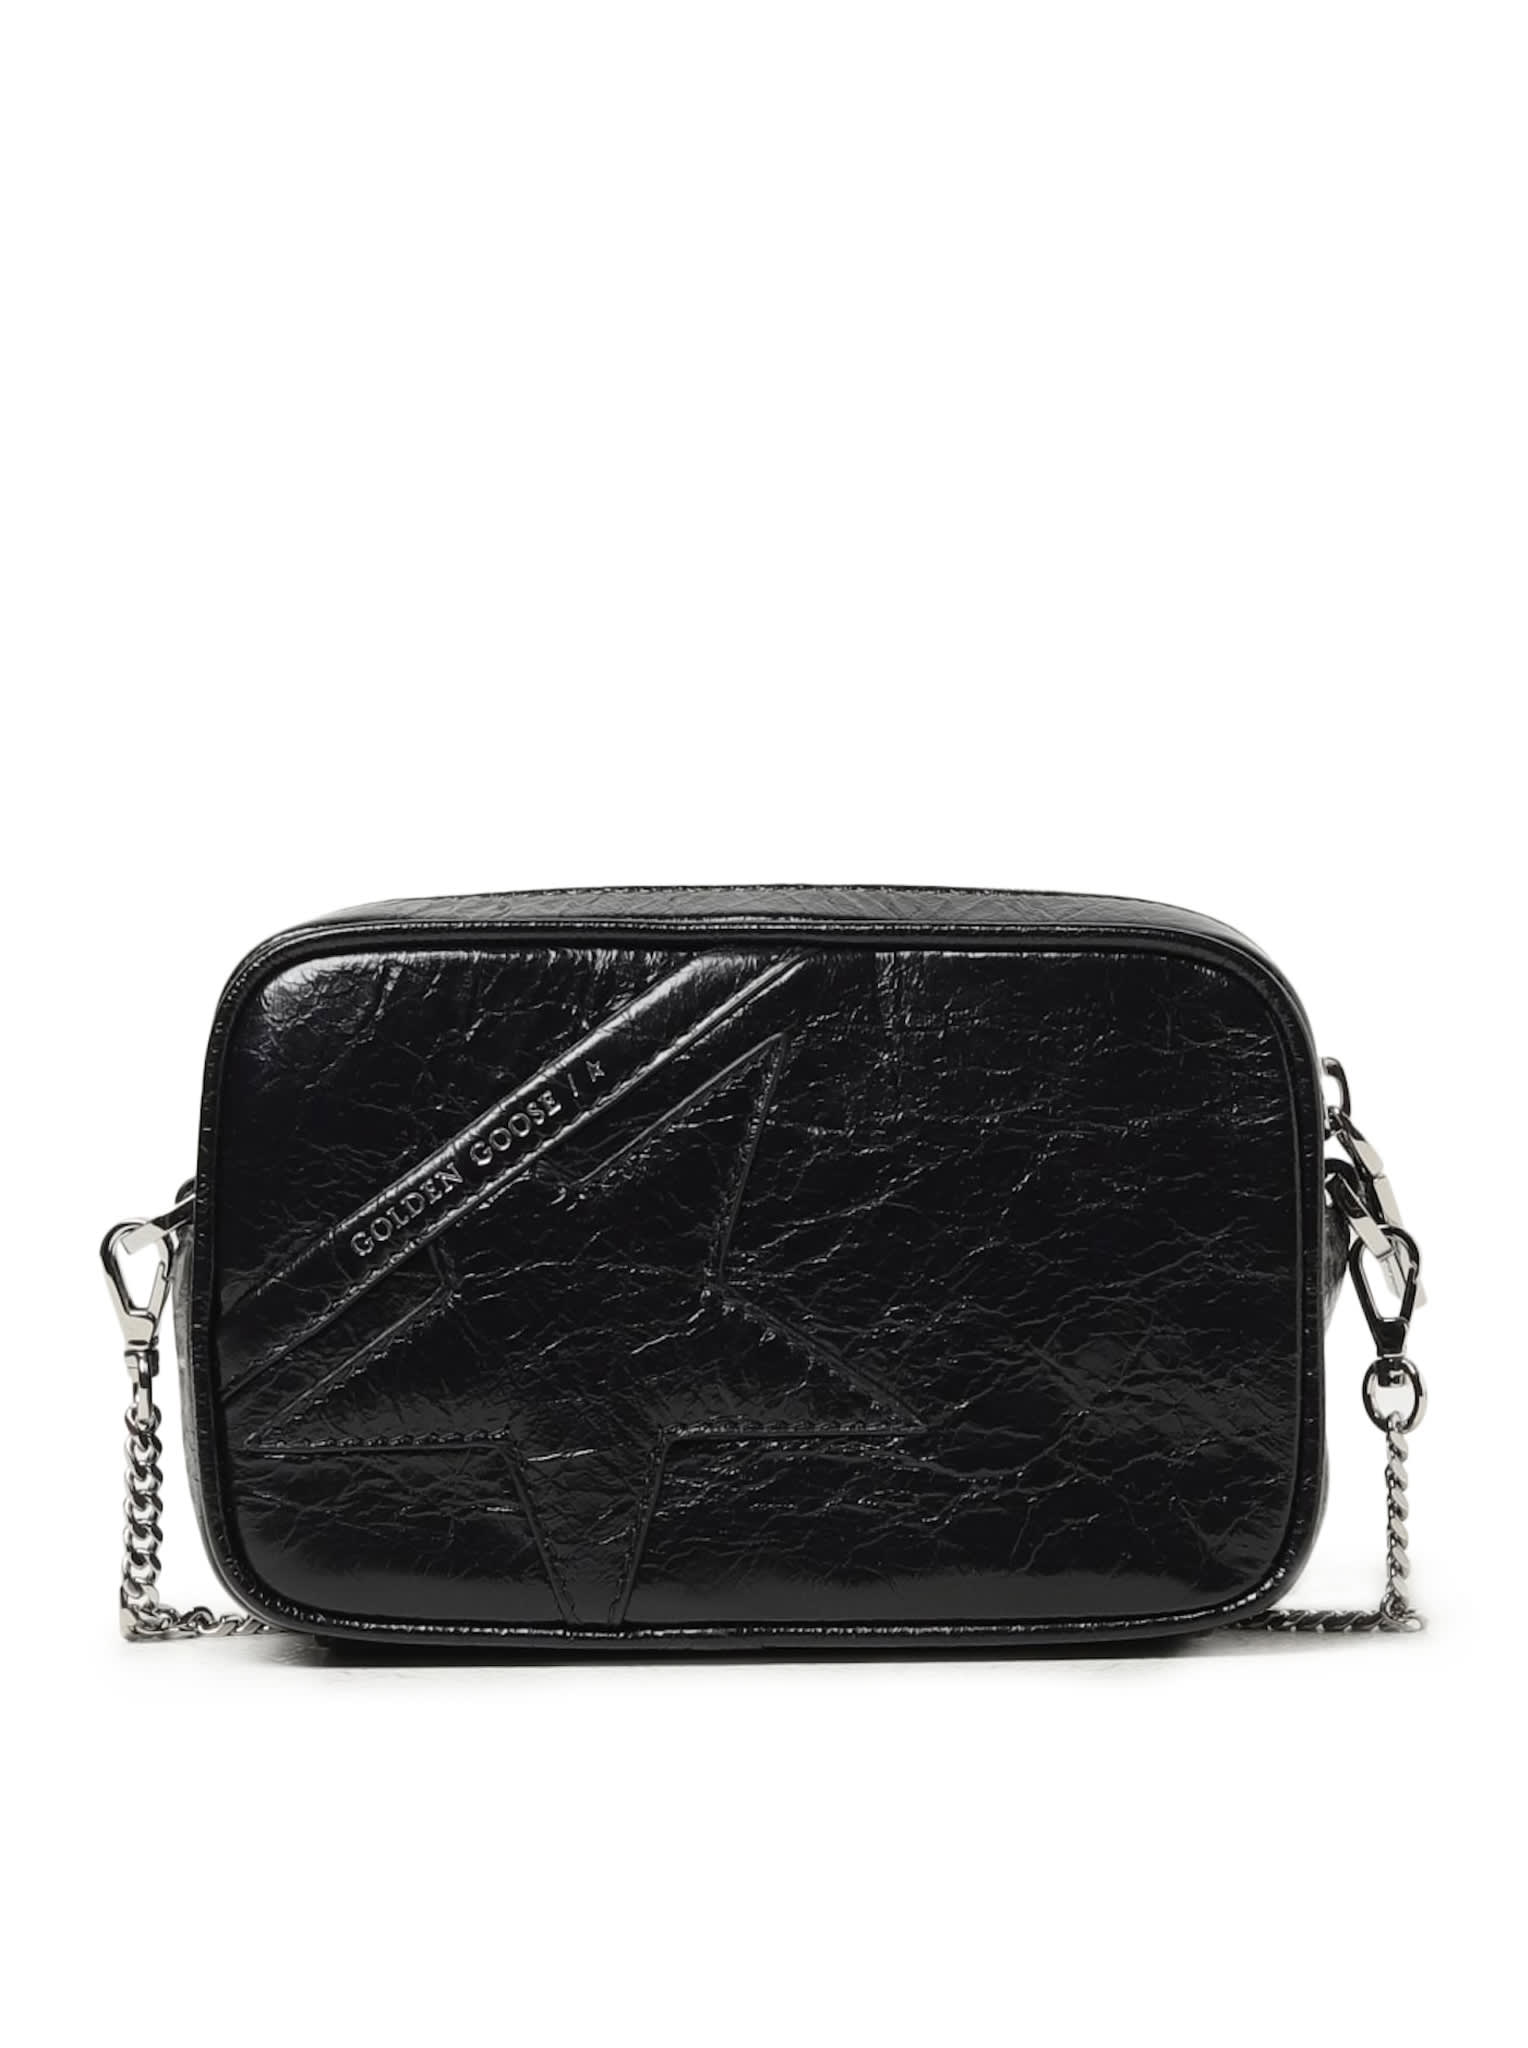 GOLDEN GOOSE MINI STAR BAG WRINKLED CALF LEATHER BODY AND STAR